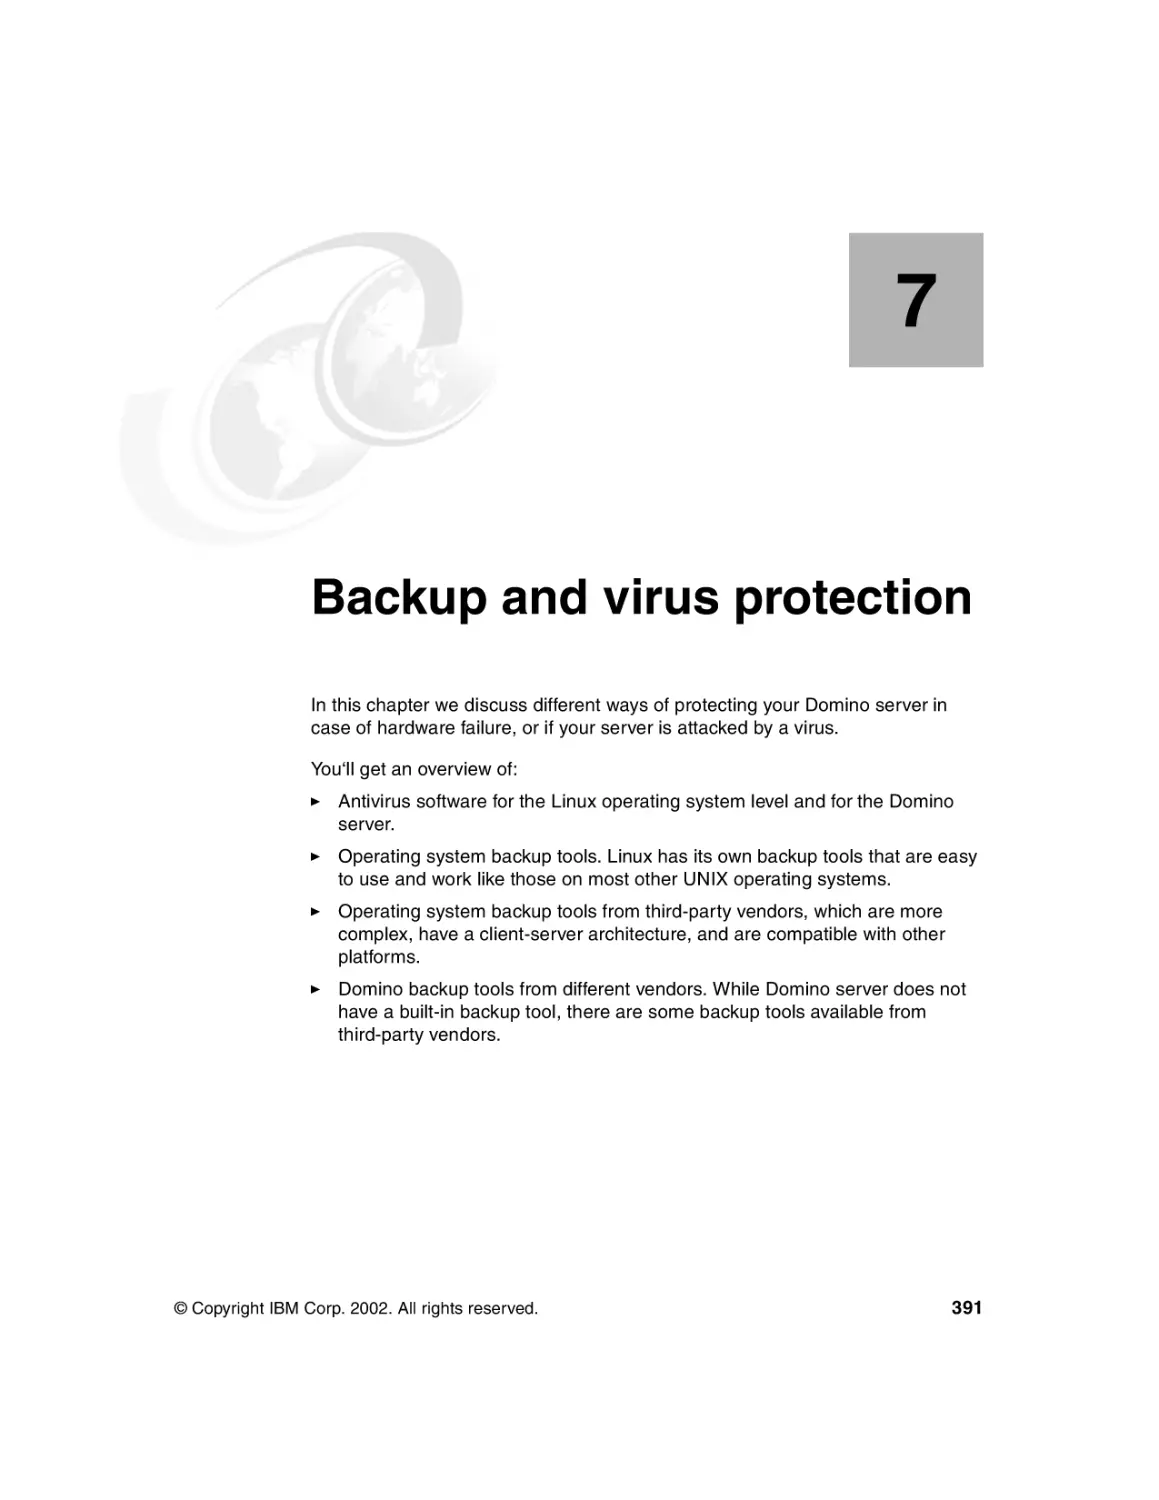 Chapter 7. Backup and virus protection